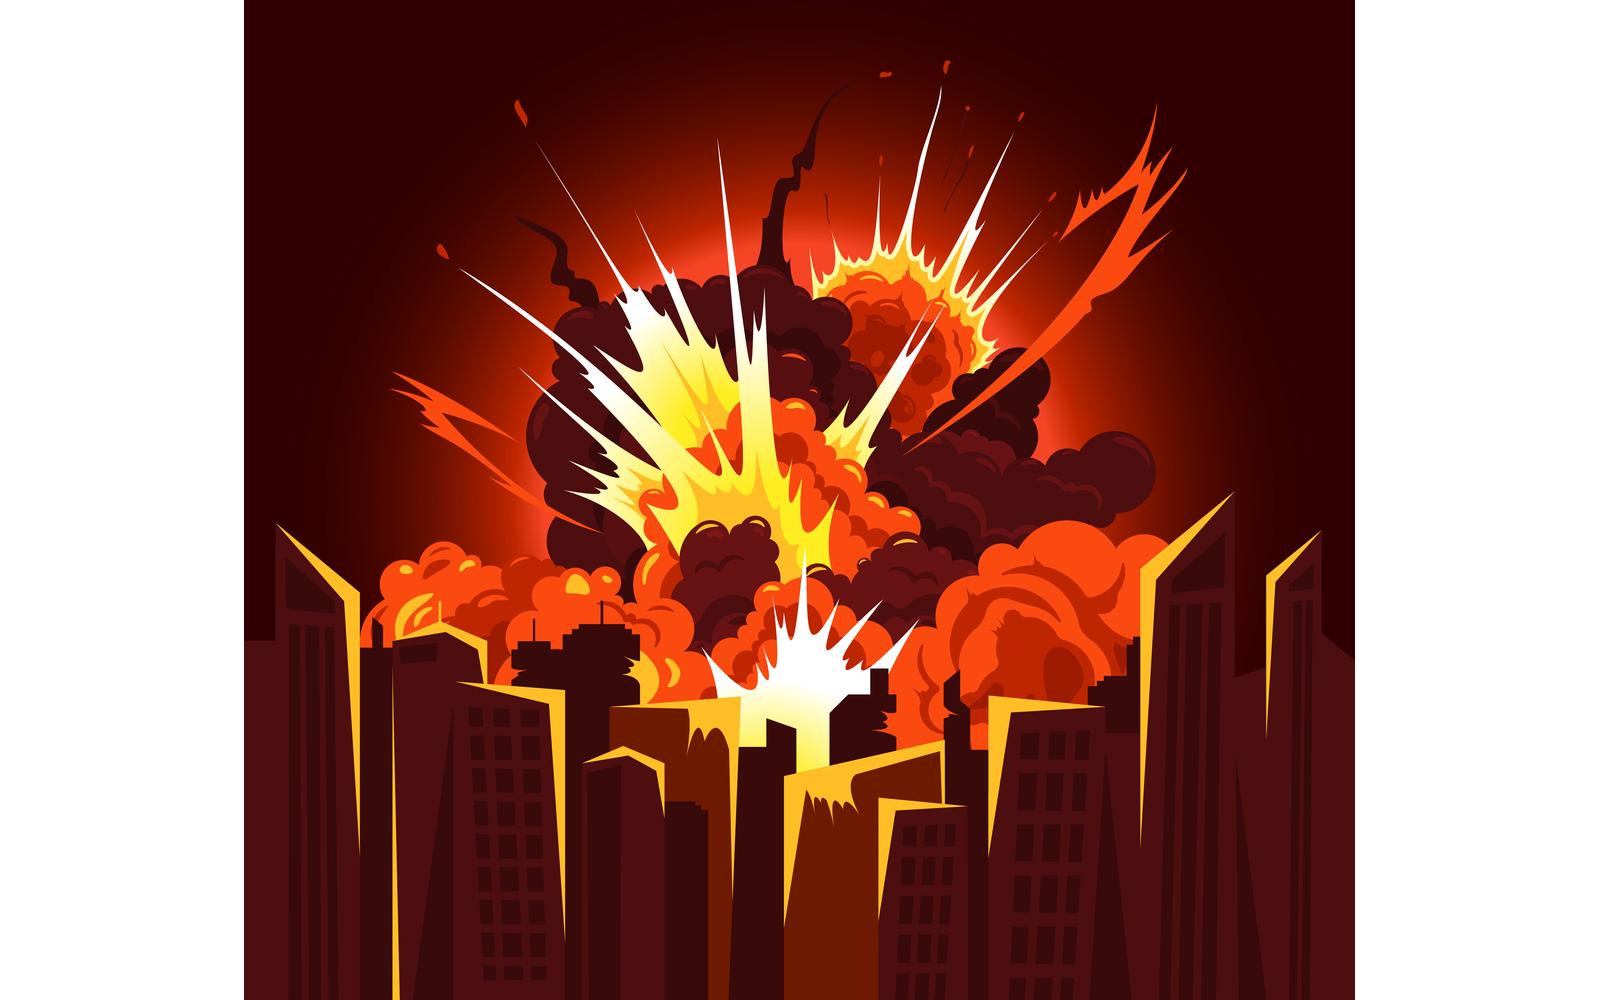 Explosion Fire Bang Atomic Bomb City 201251811 Vector Illustration Concept